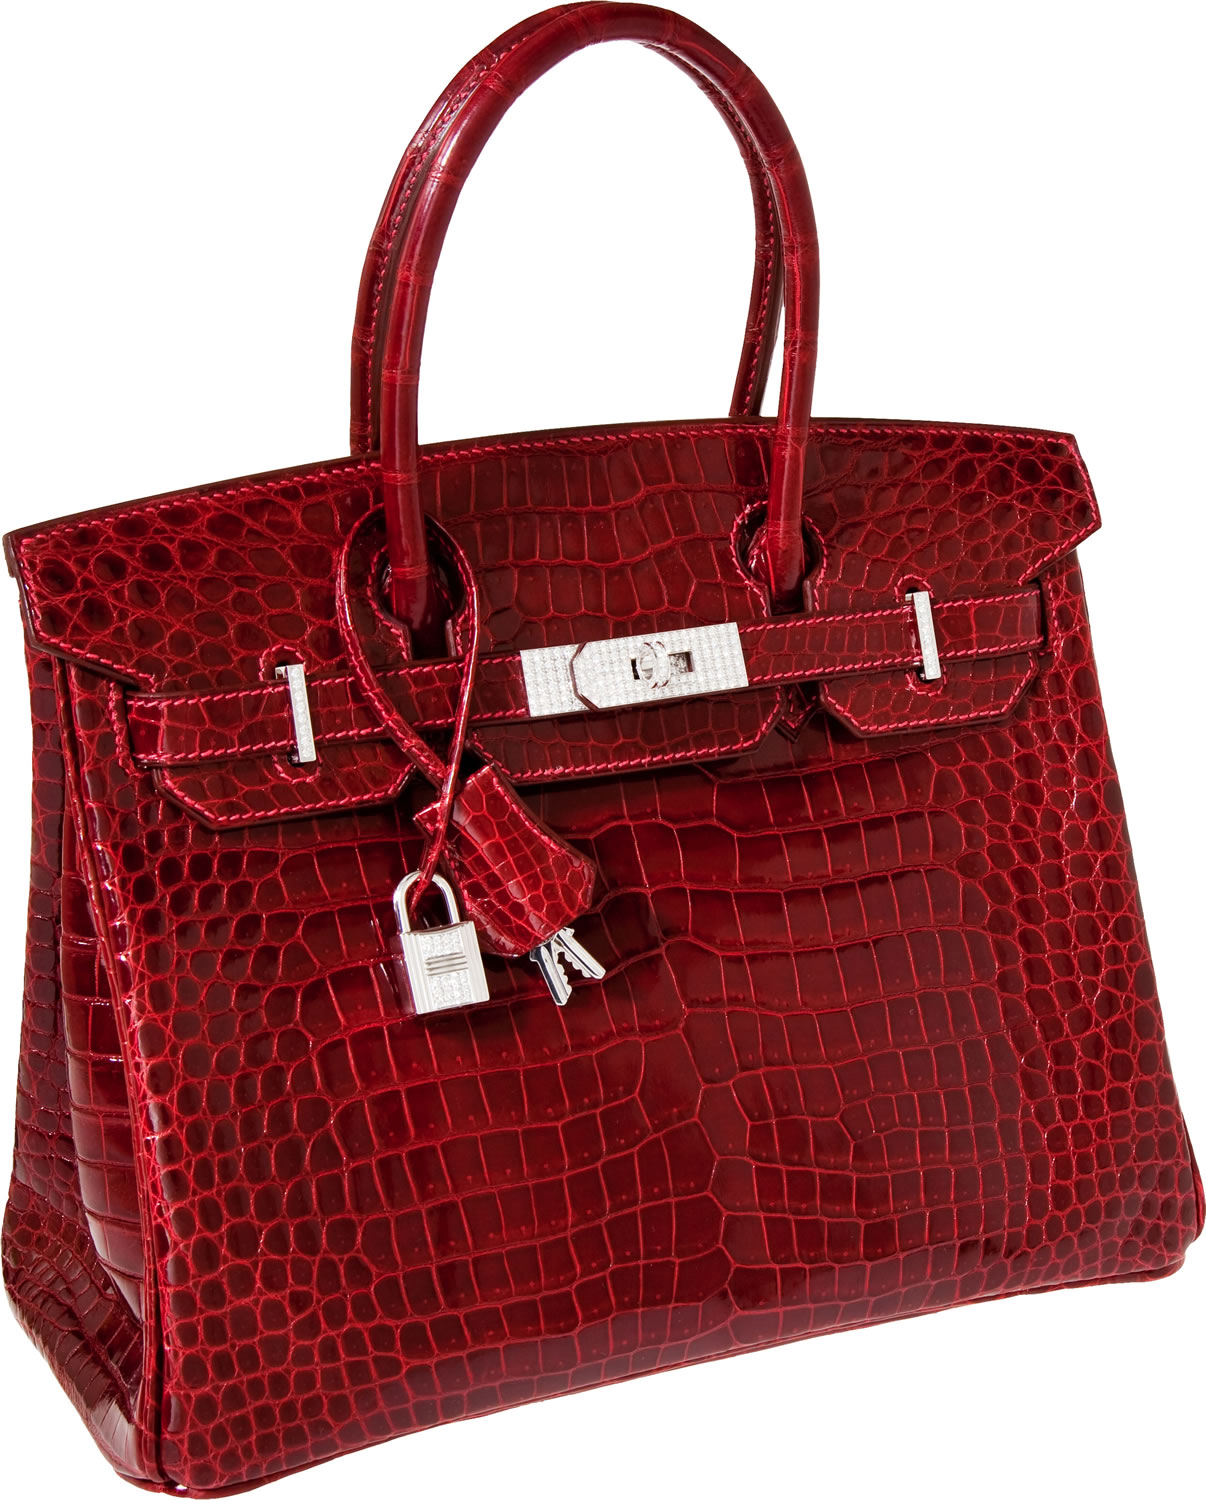 Most expensive purse: Hermes Birkin Bags sets world record